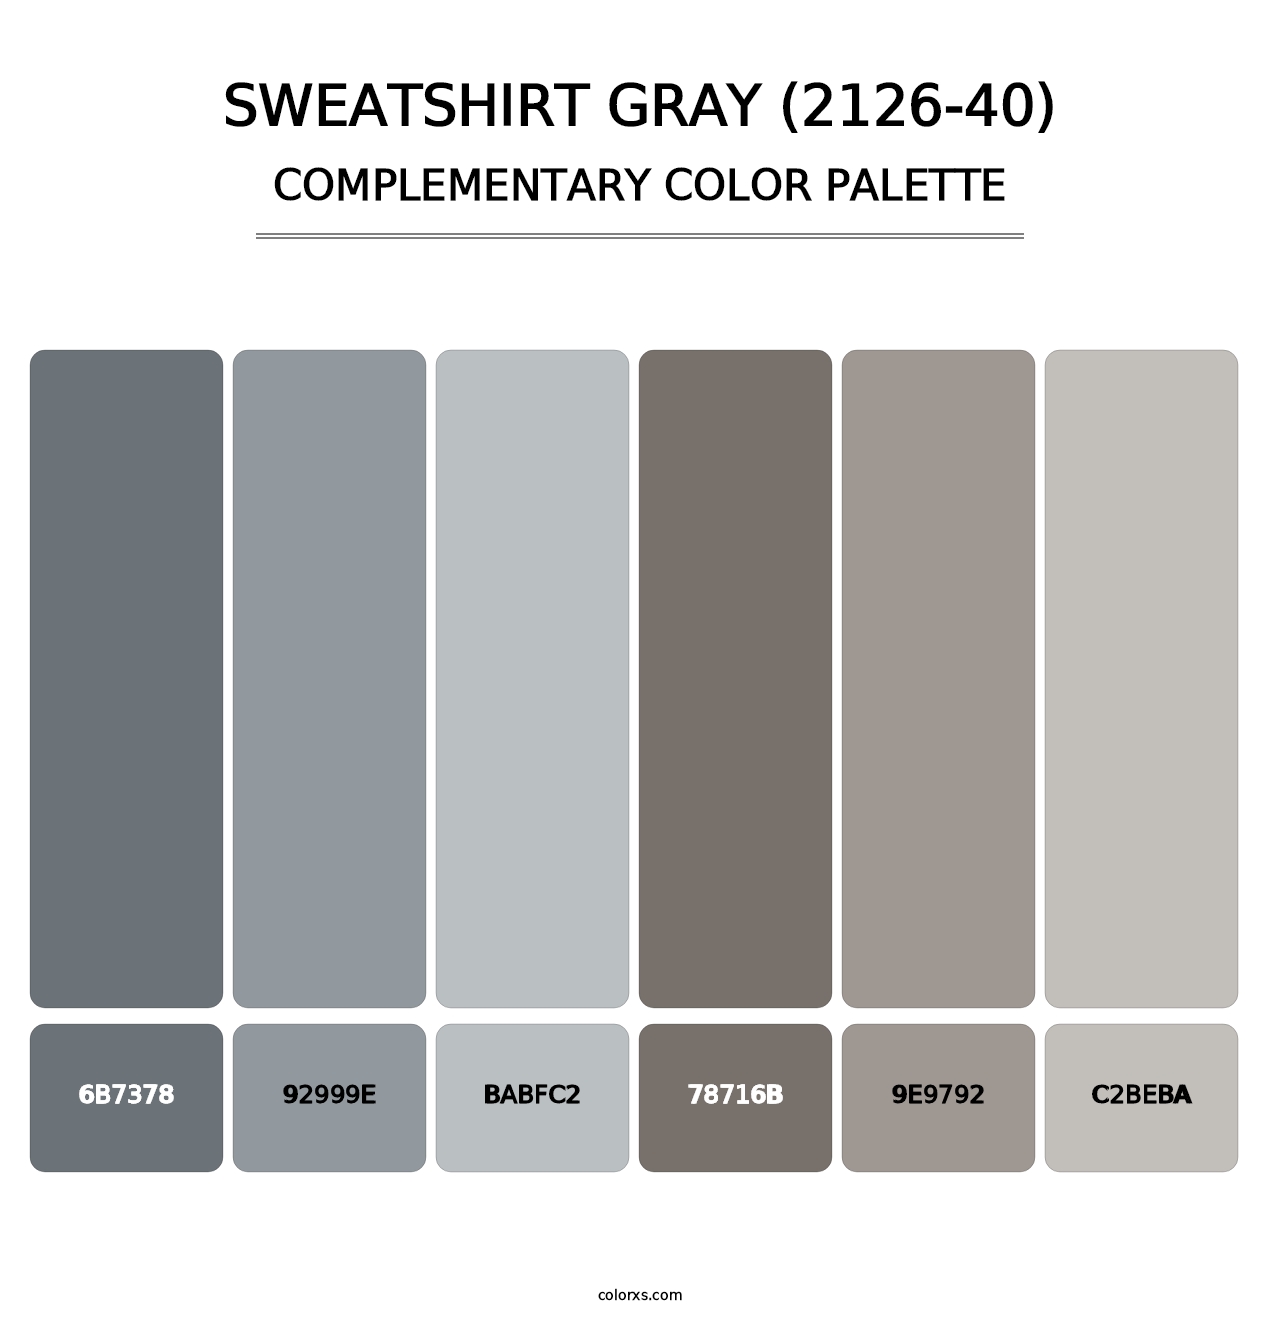 Sweatshirt Gray (2126-40) - Complementary Color Palette